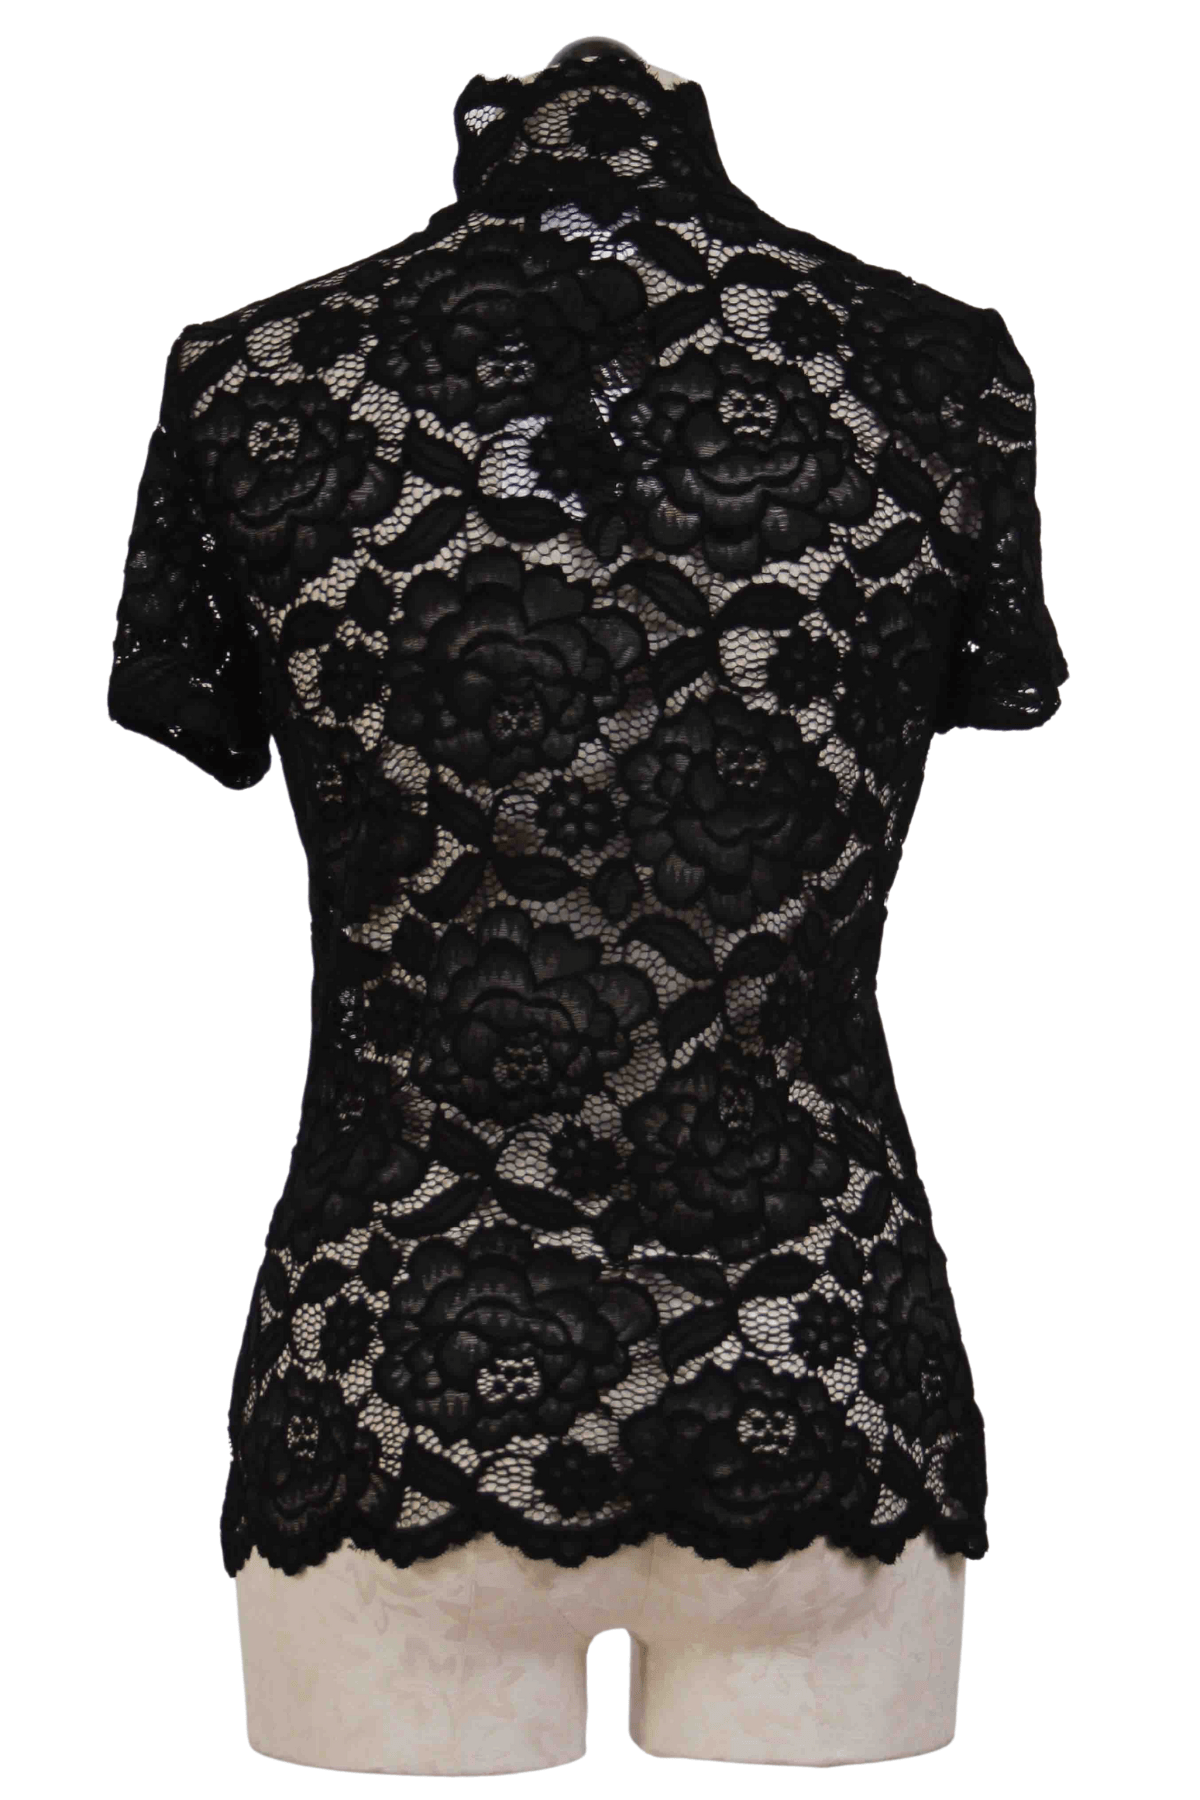 back view of Black Short Sleeve Lace Mock Neck Top by Frank Lyman